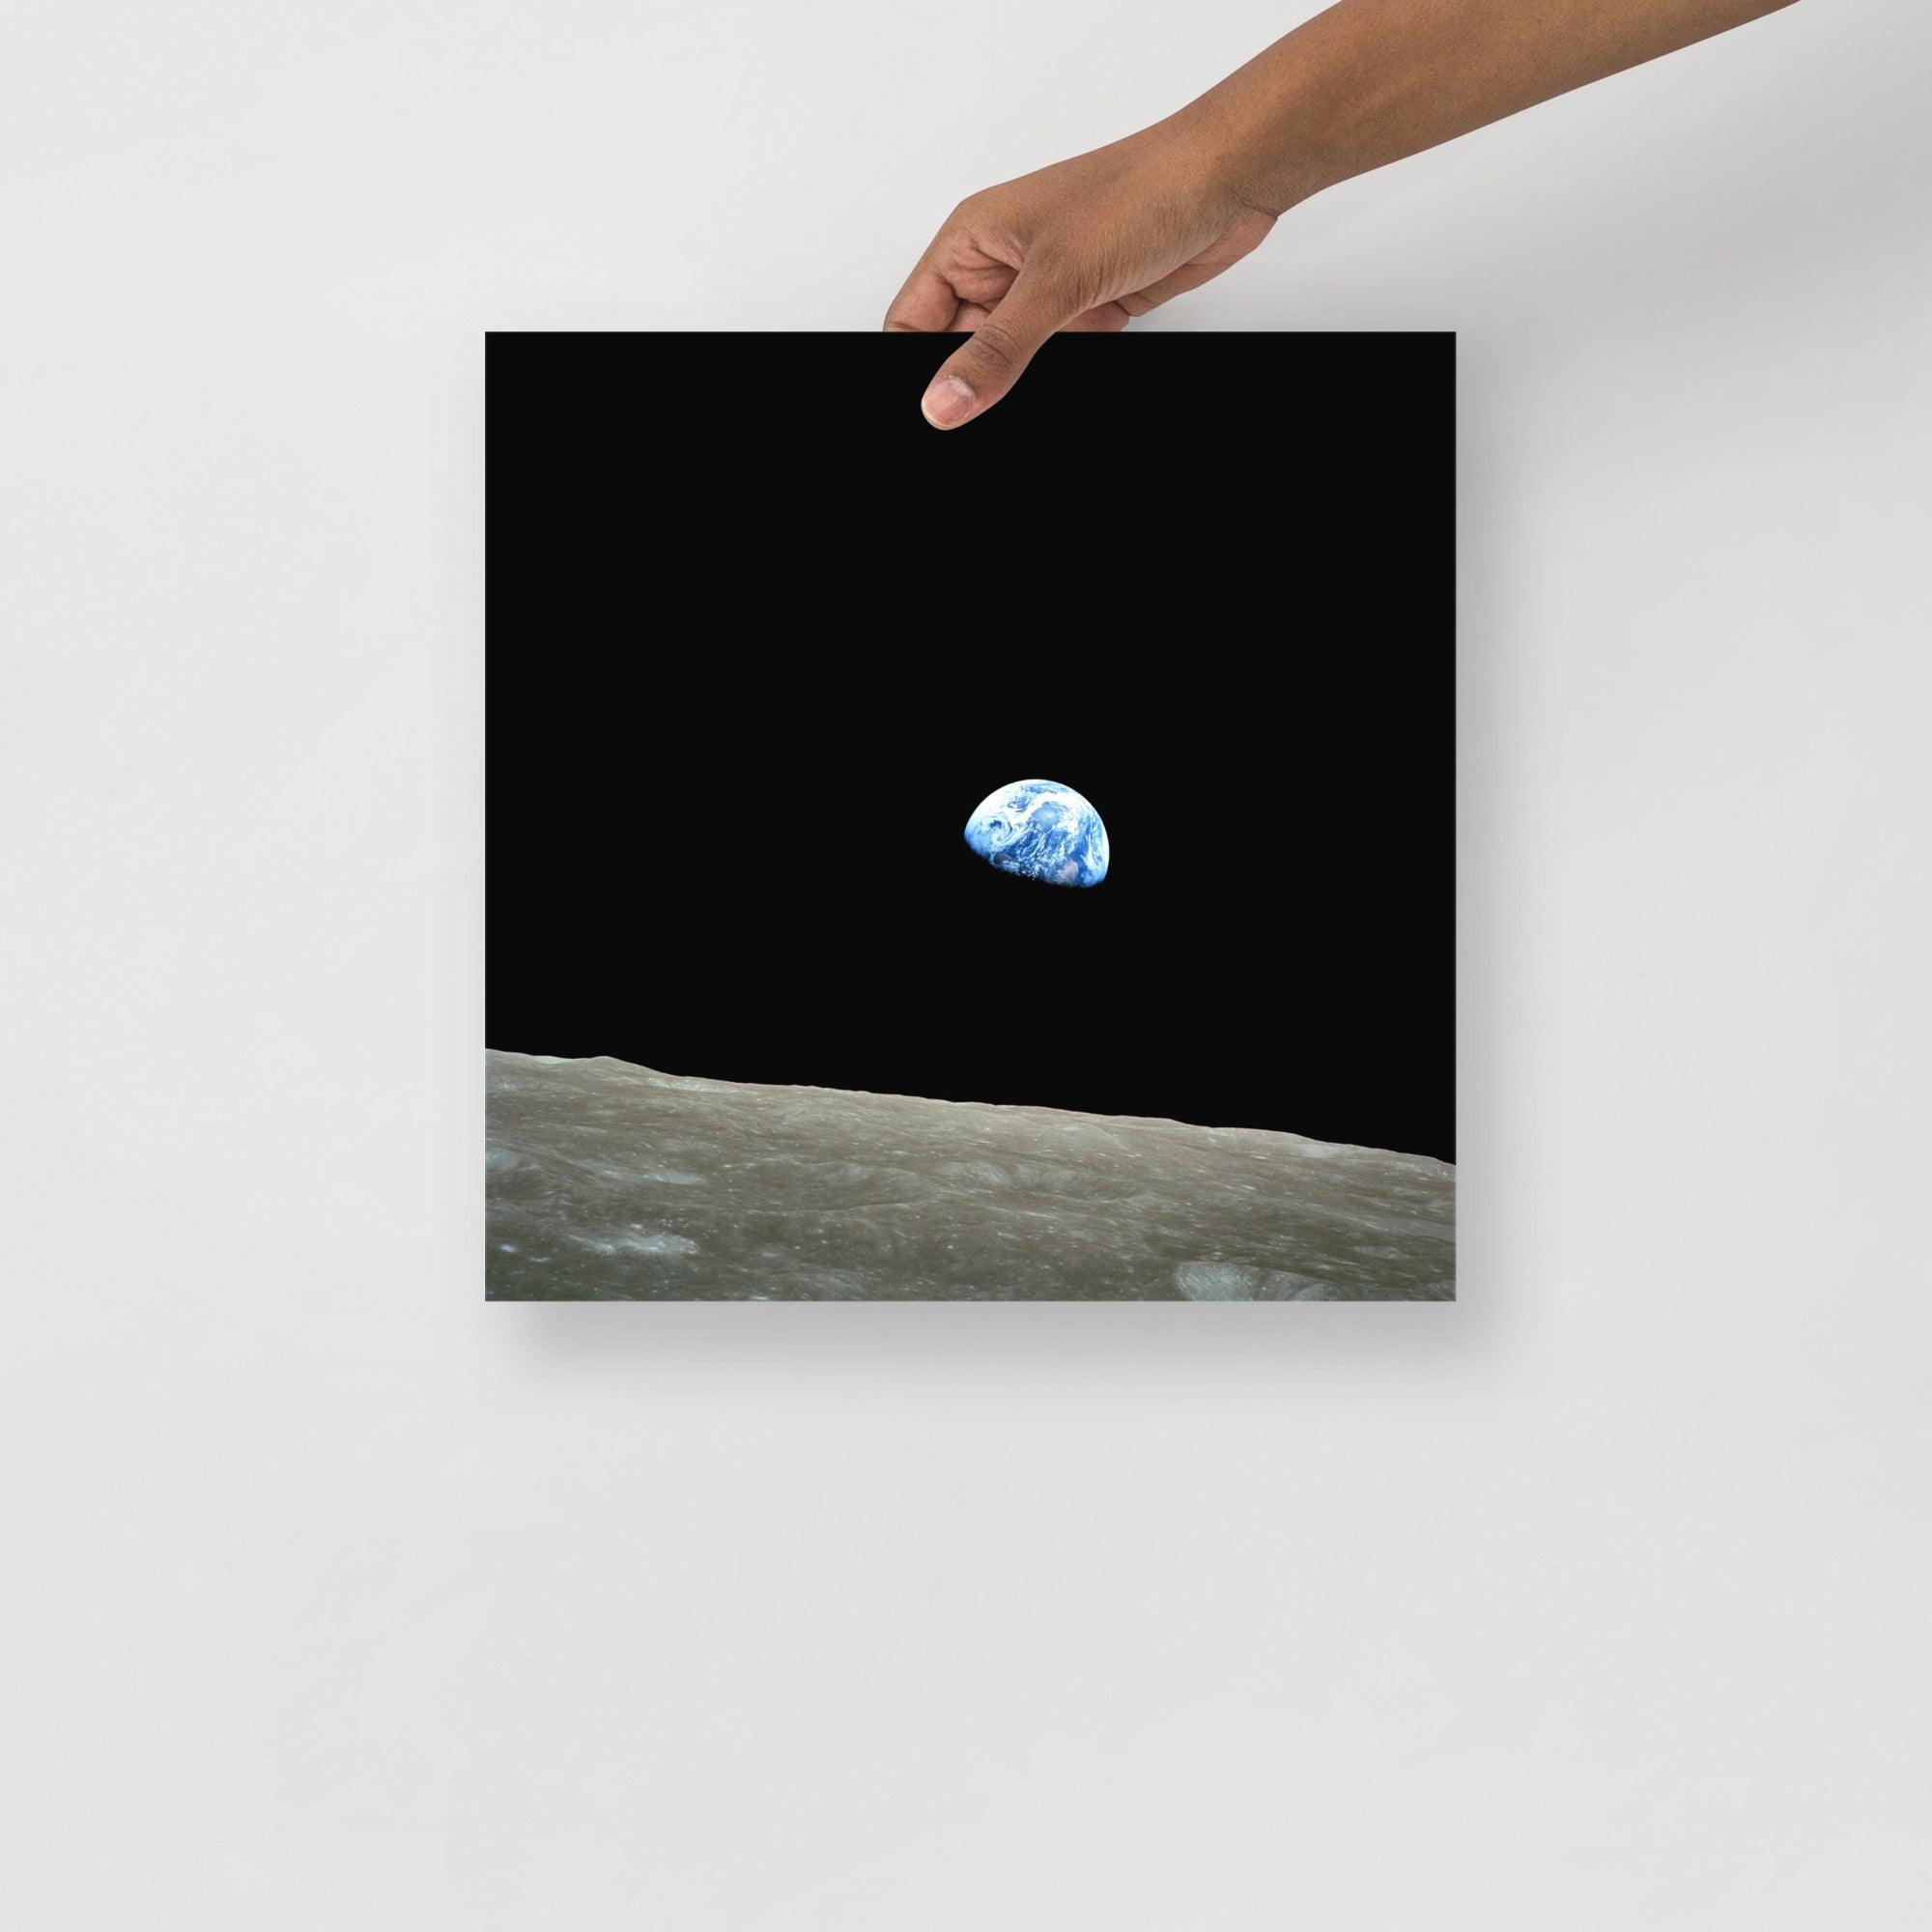 An Earthrise Apollo 8 poster on a plain backdrop in size 14x14”.